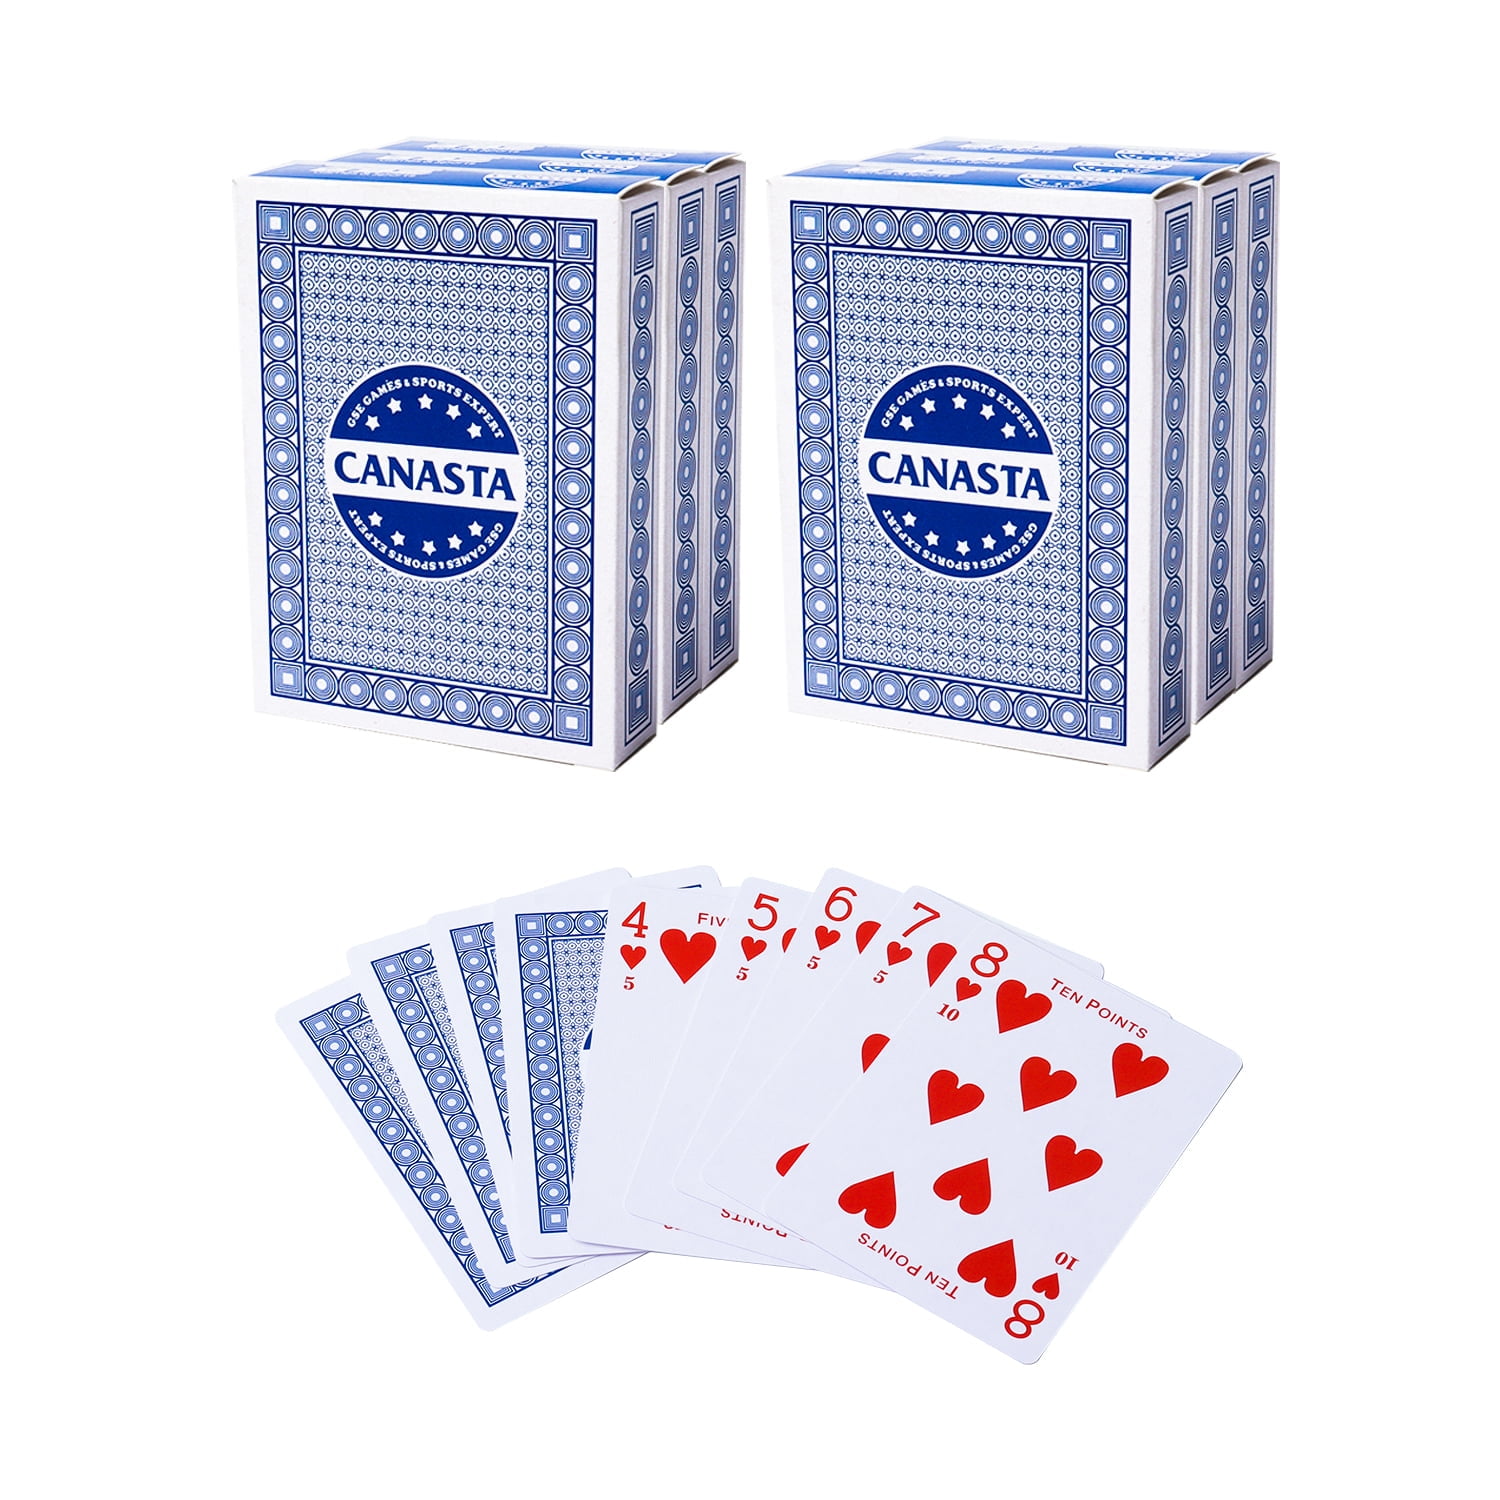 Toy Time Jumbo 8x11 Deck of Playing Cards